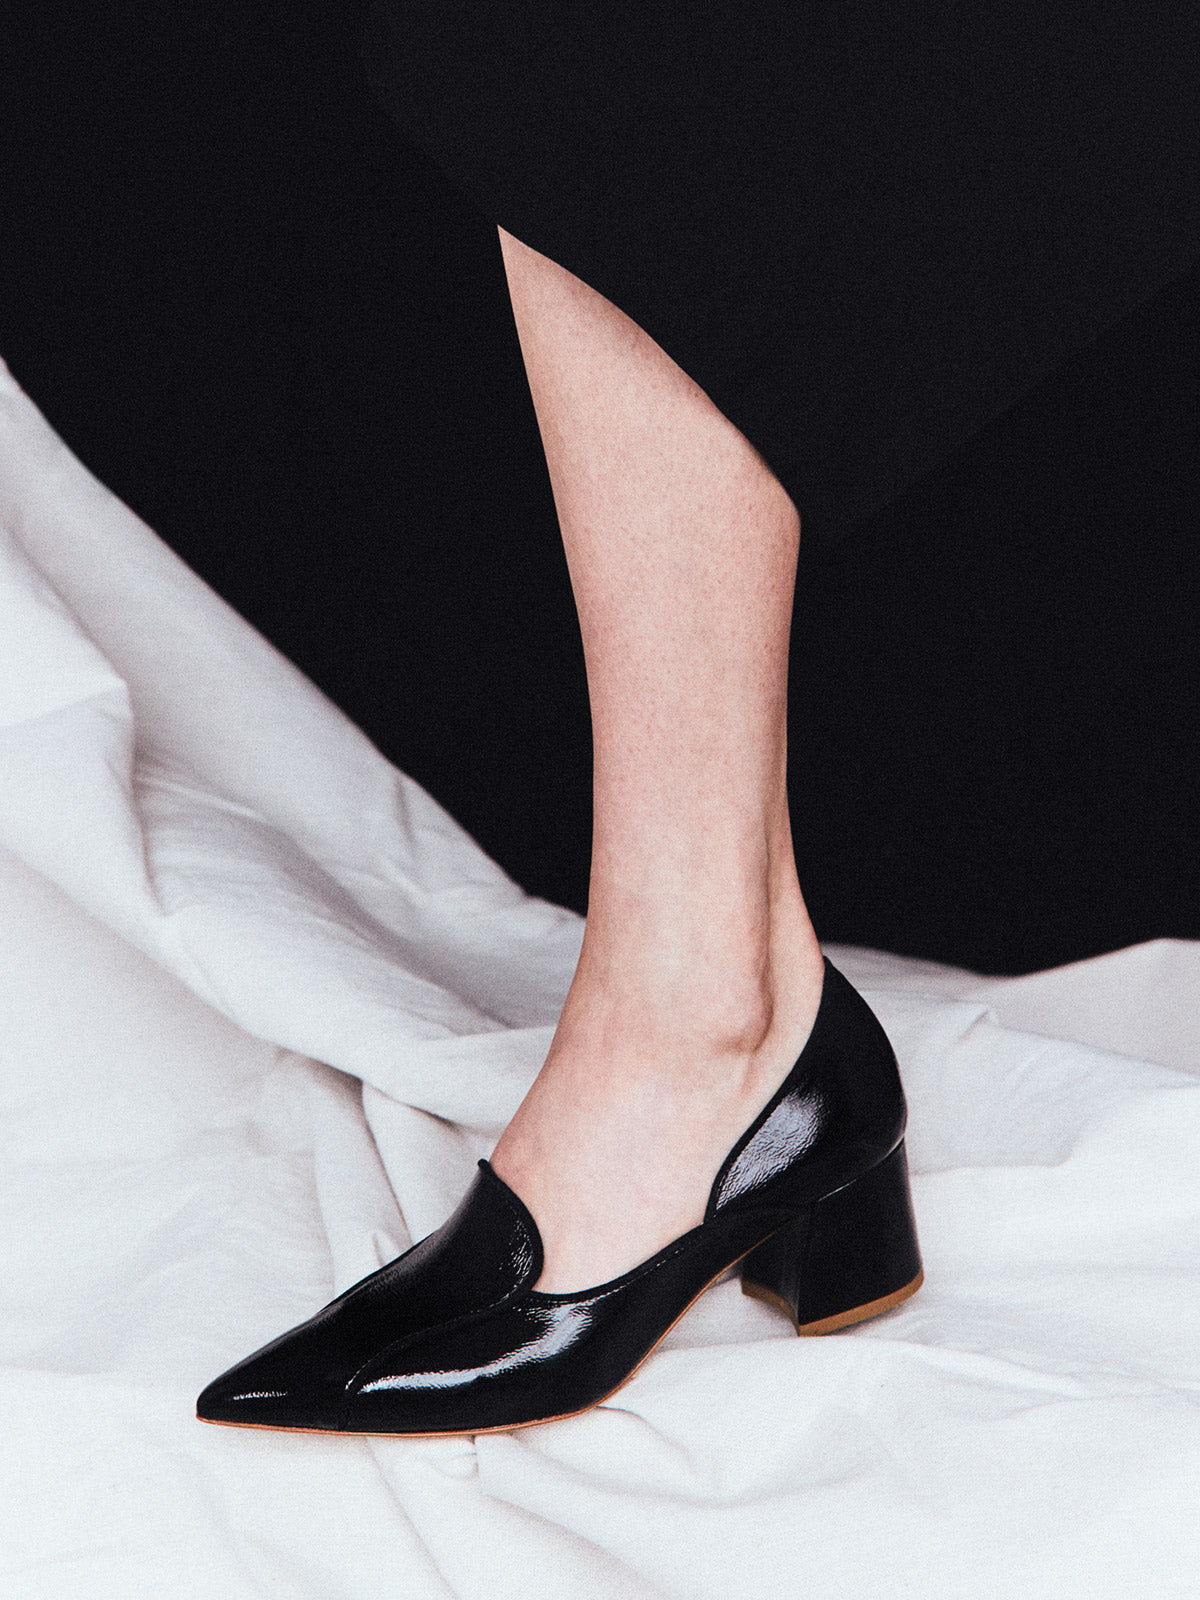 Spotlight on the Black Patent Leather Fiona Flat because she is really cute  and deserves it 🖤